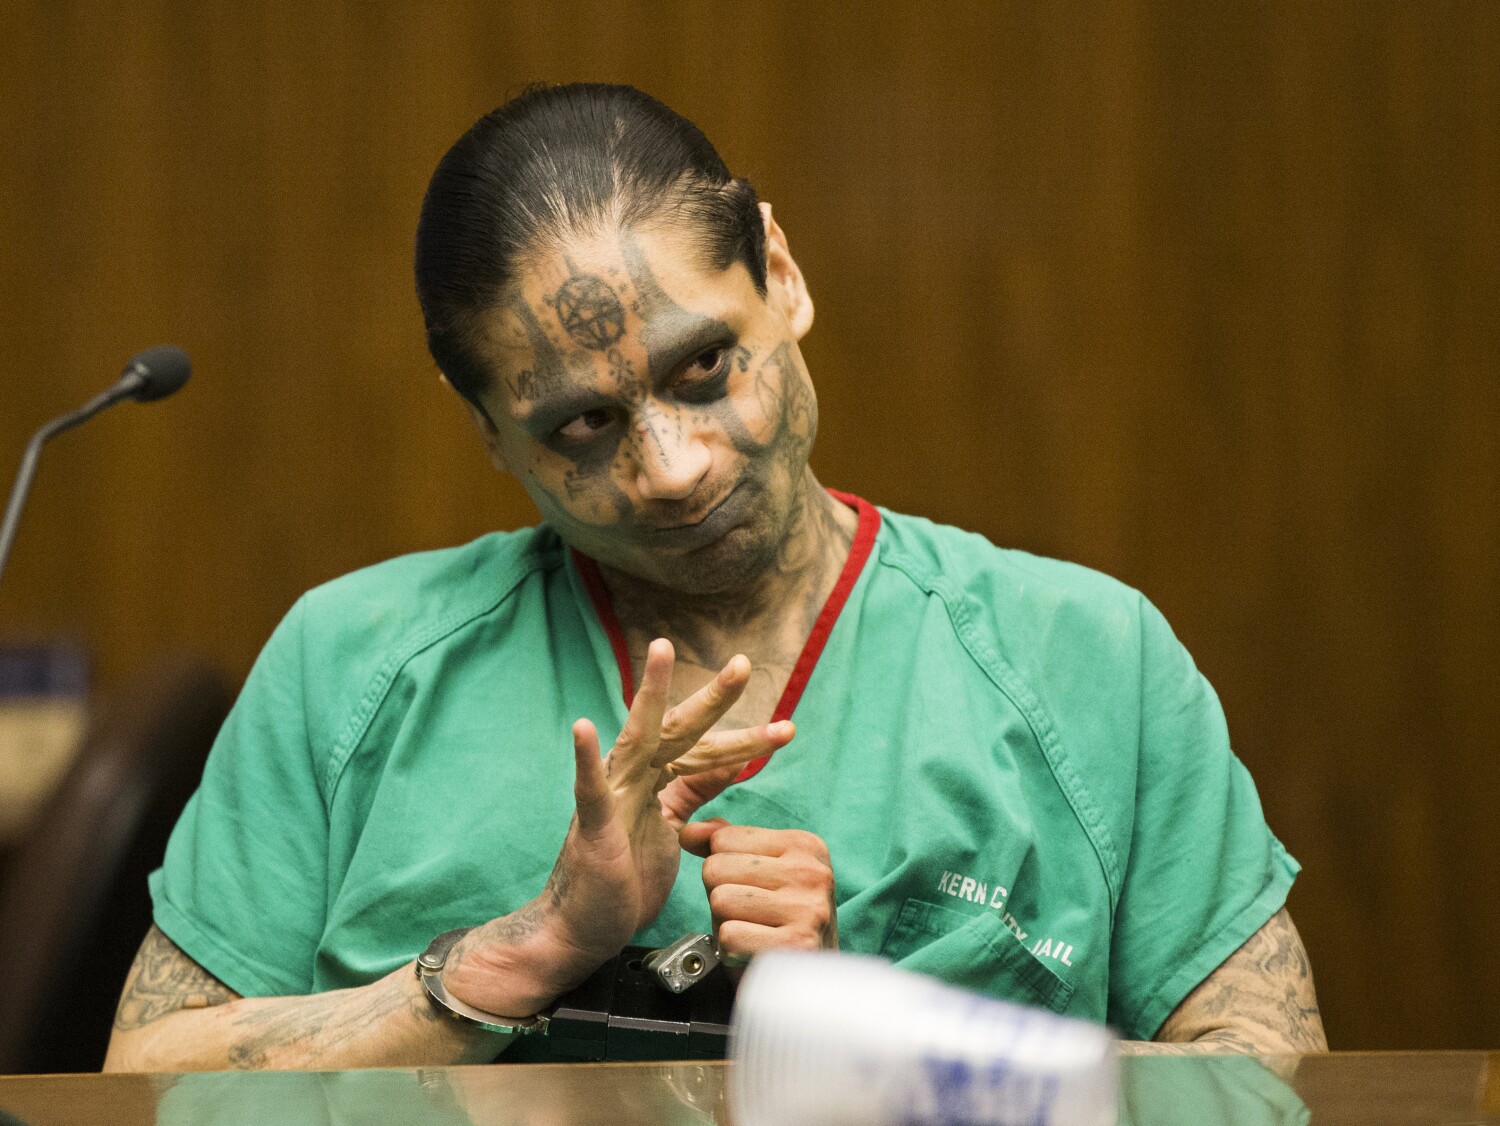 A self-styled satanist beheaded his cellmate, but the guards didn't notice, report says